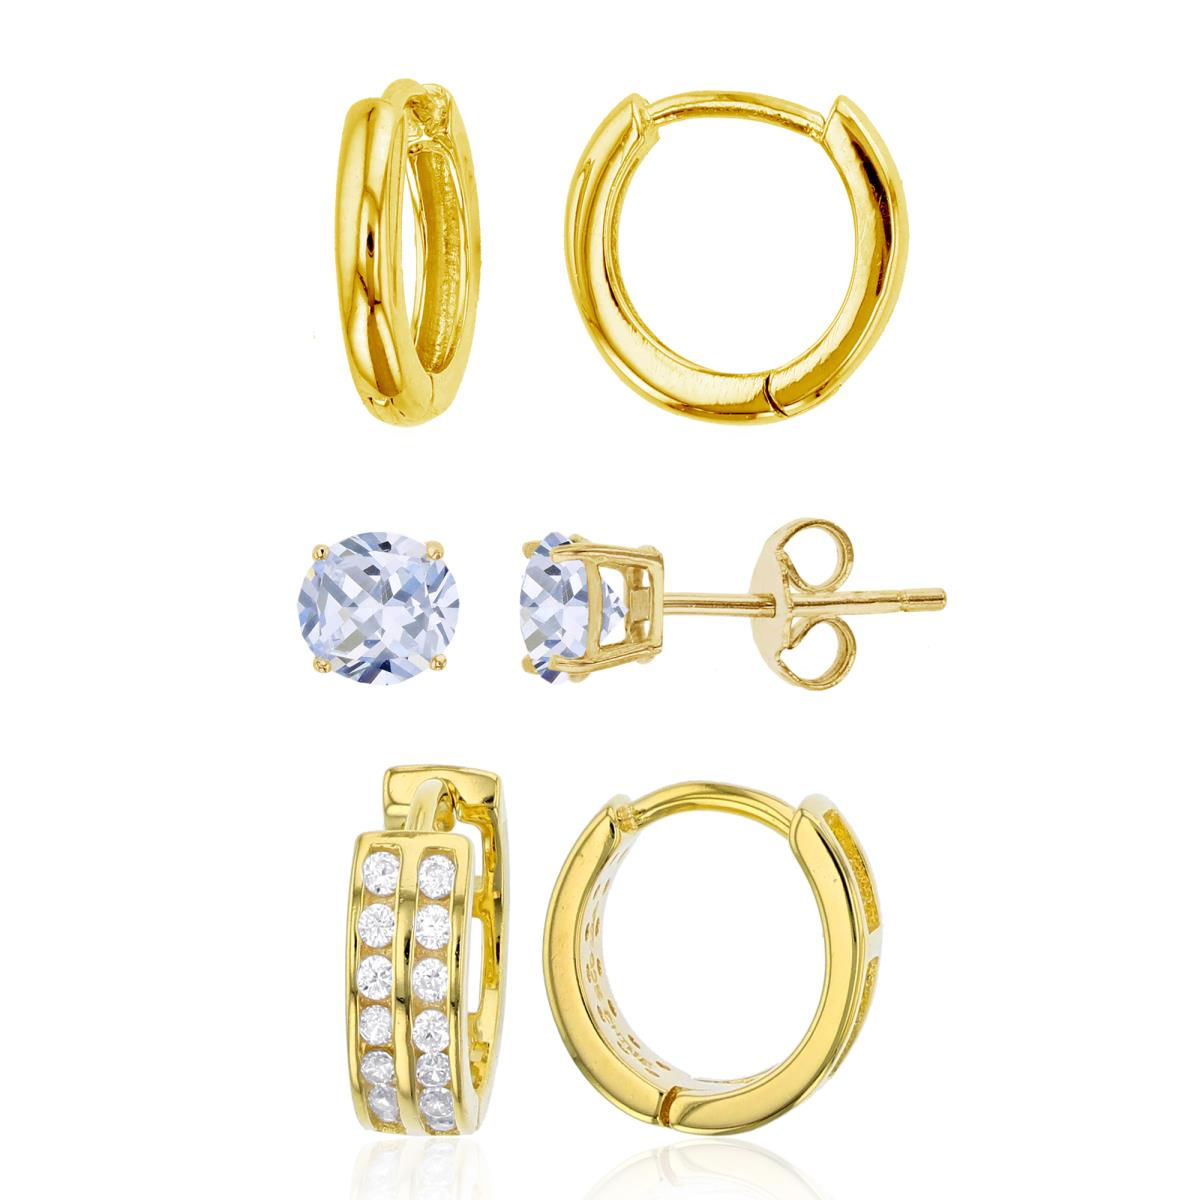 Sterling Silver Yellow High Polished, Paved Huggie and Solitaire Stud Earring Set